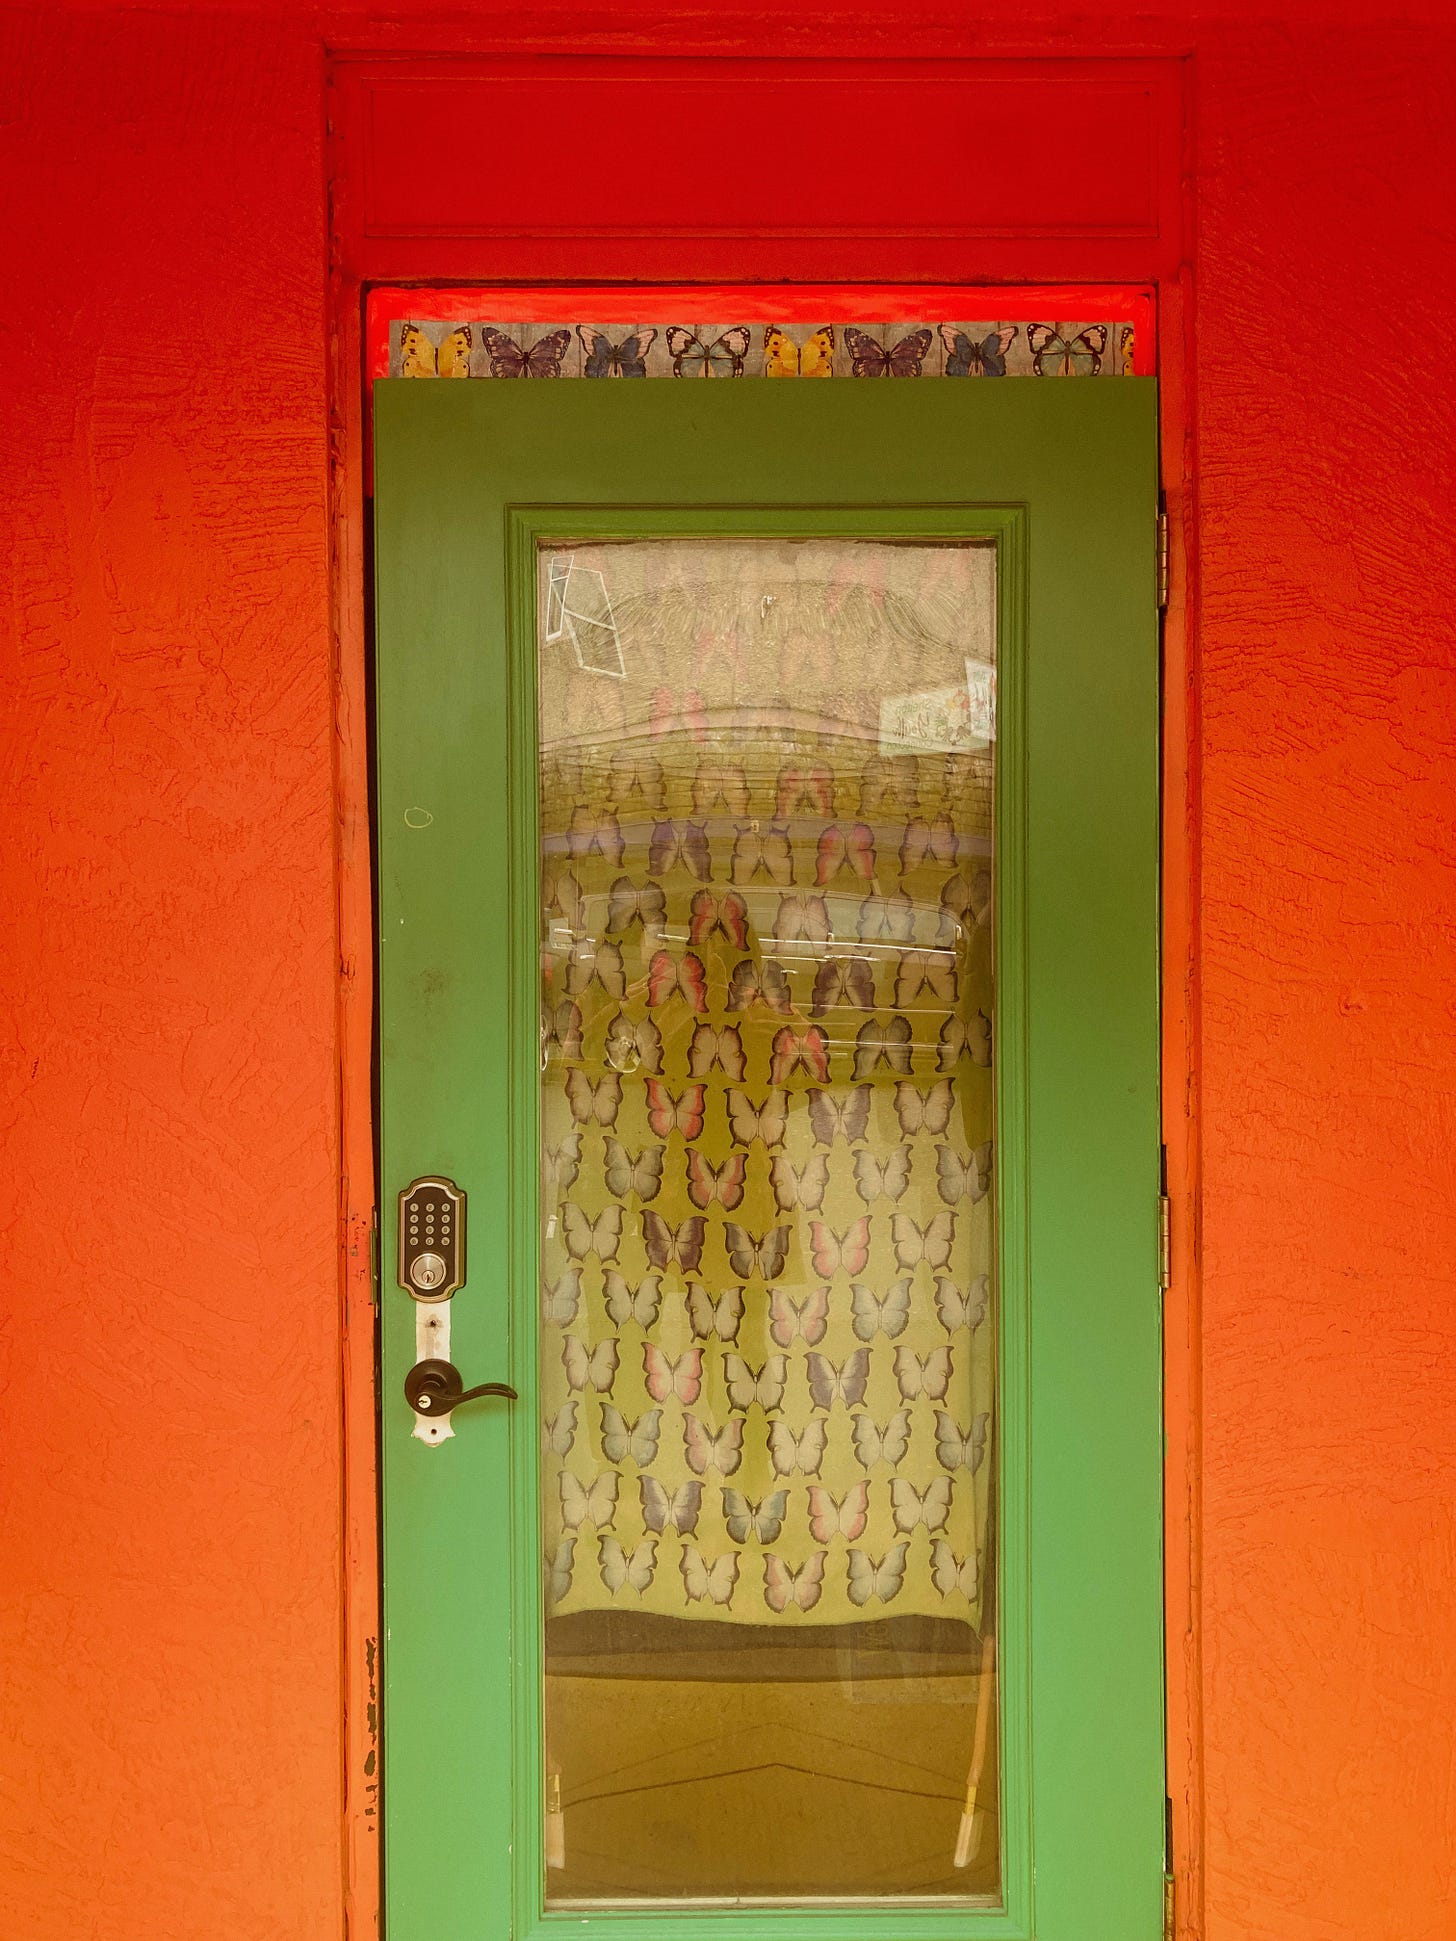 A green door against bright orange walls. There is butterfly-printed fabric hanging on the other side of the glass of the window.